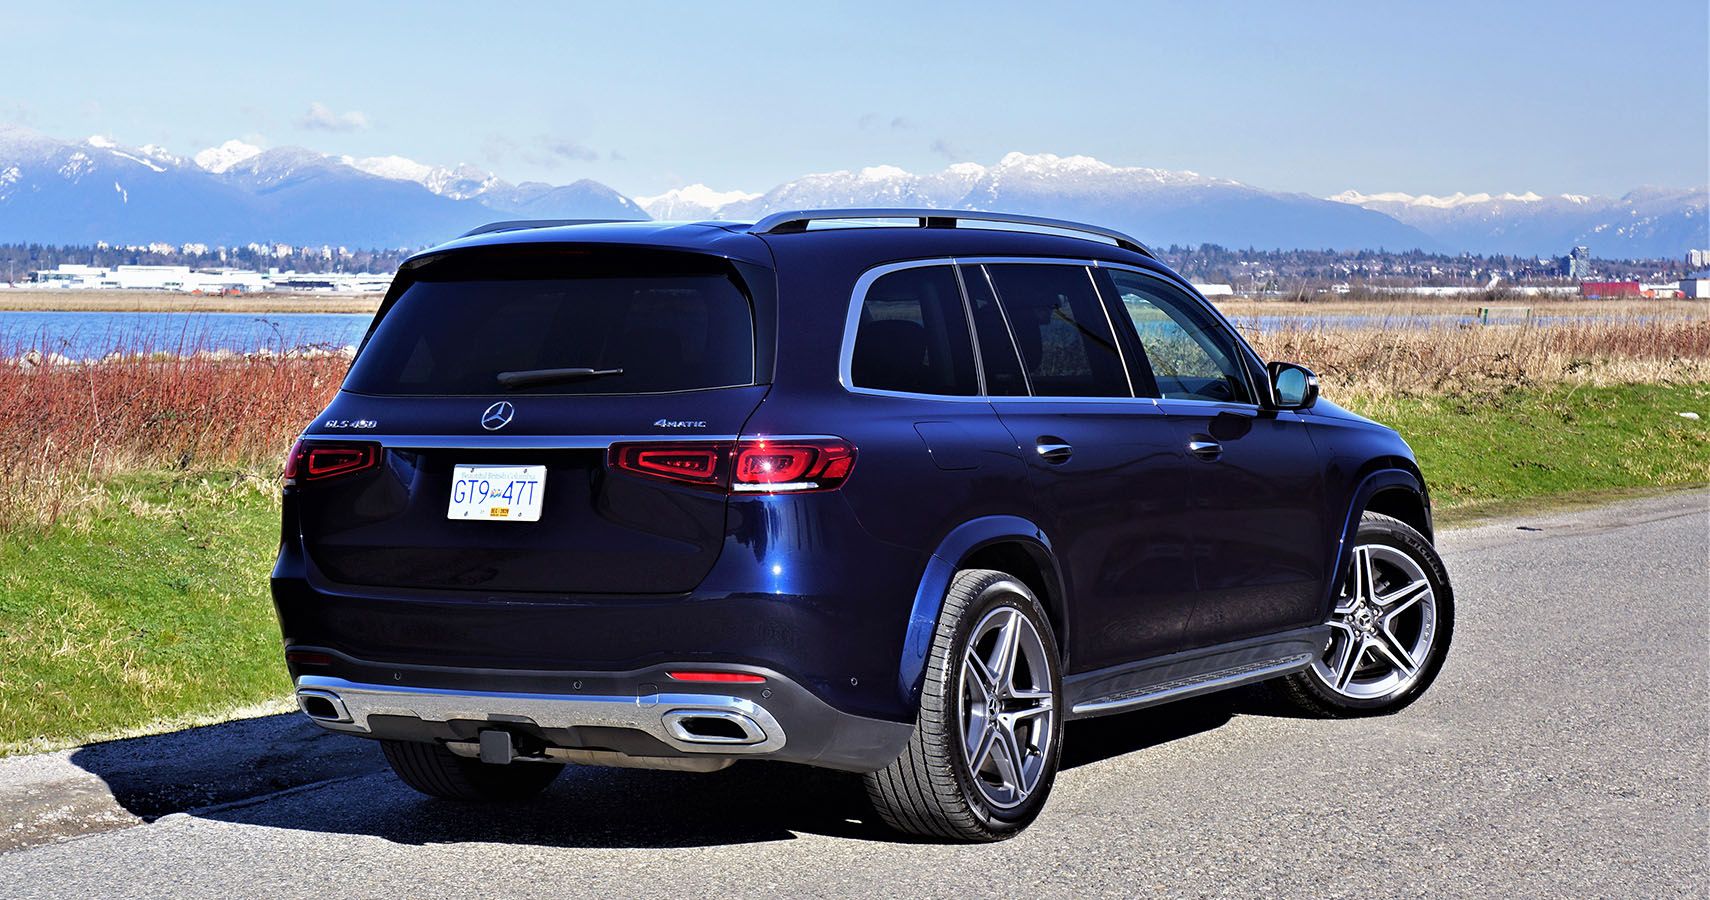 Mercedes completely updated its GLS for 2020, with its new horizontal taillight design being the most dramatic change.